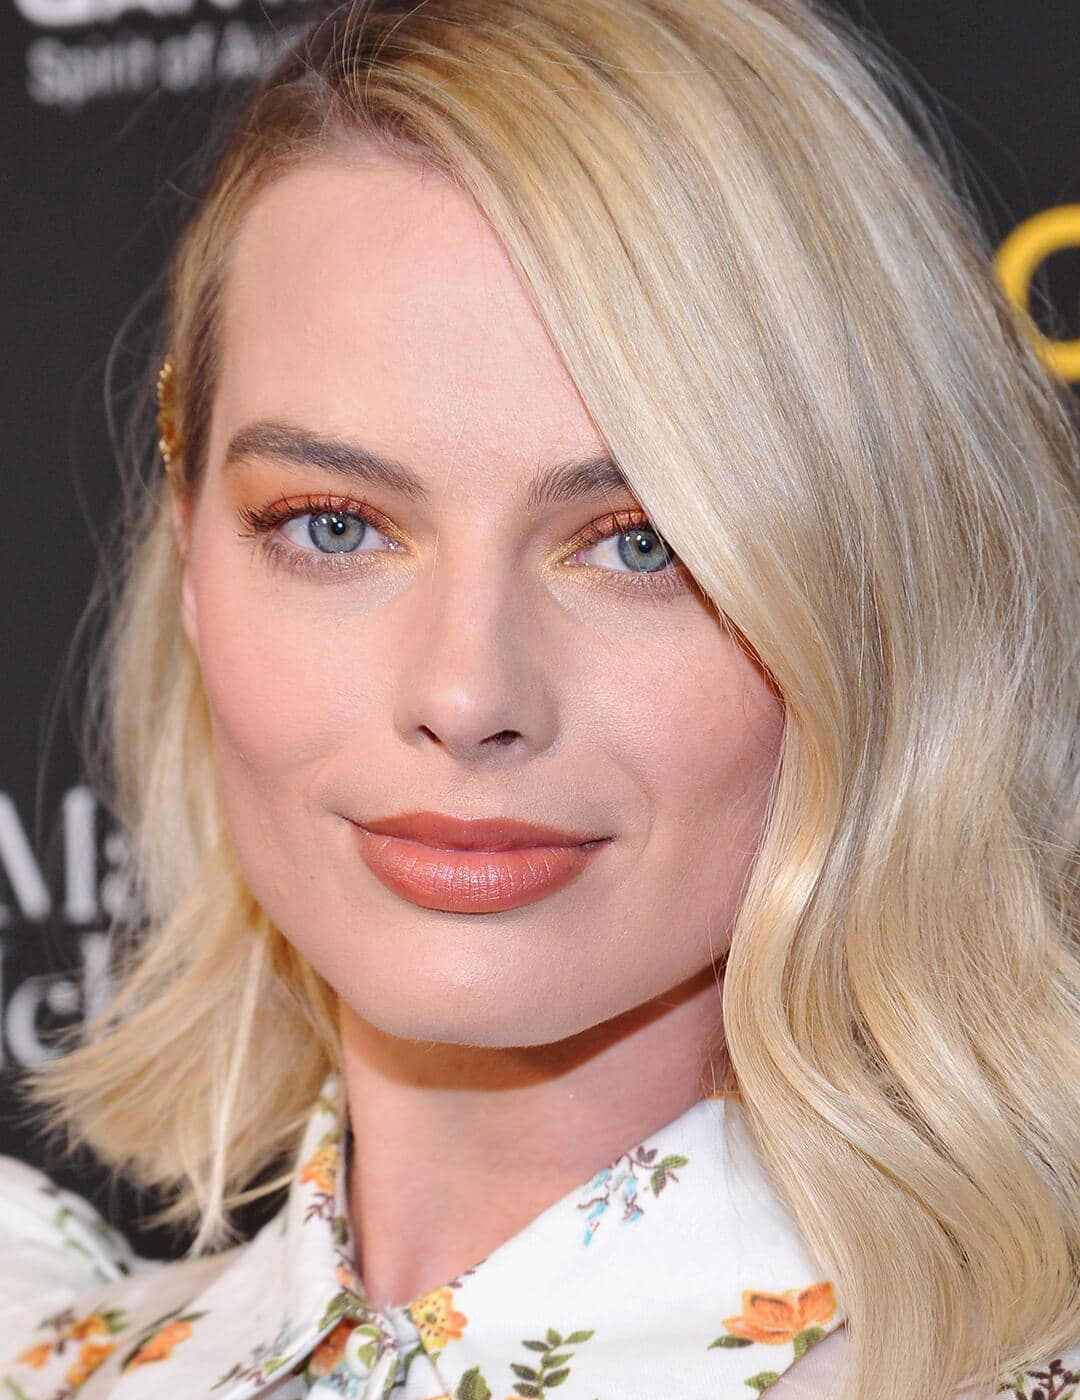 A photo of Margot Robbie wearing a floral dress and an orange eyeshadow